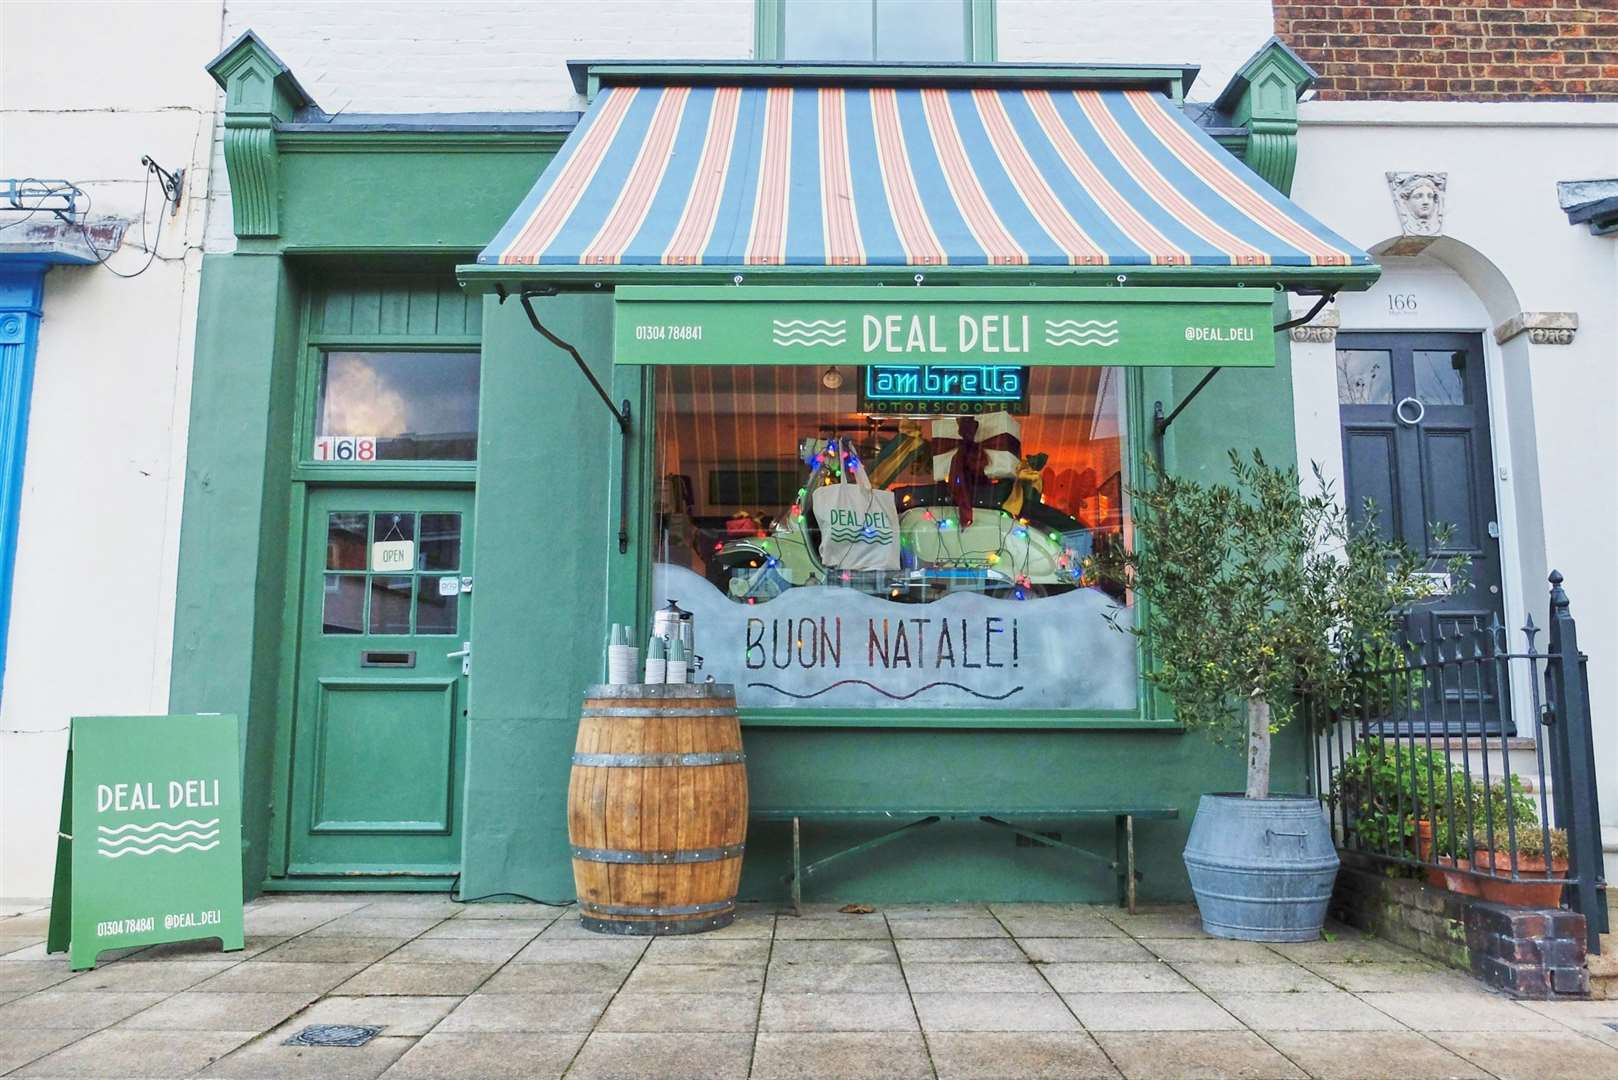 Deal Deli has opened at the north end of Deal High Street